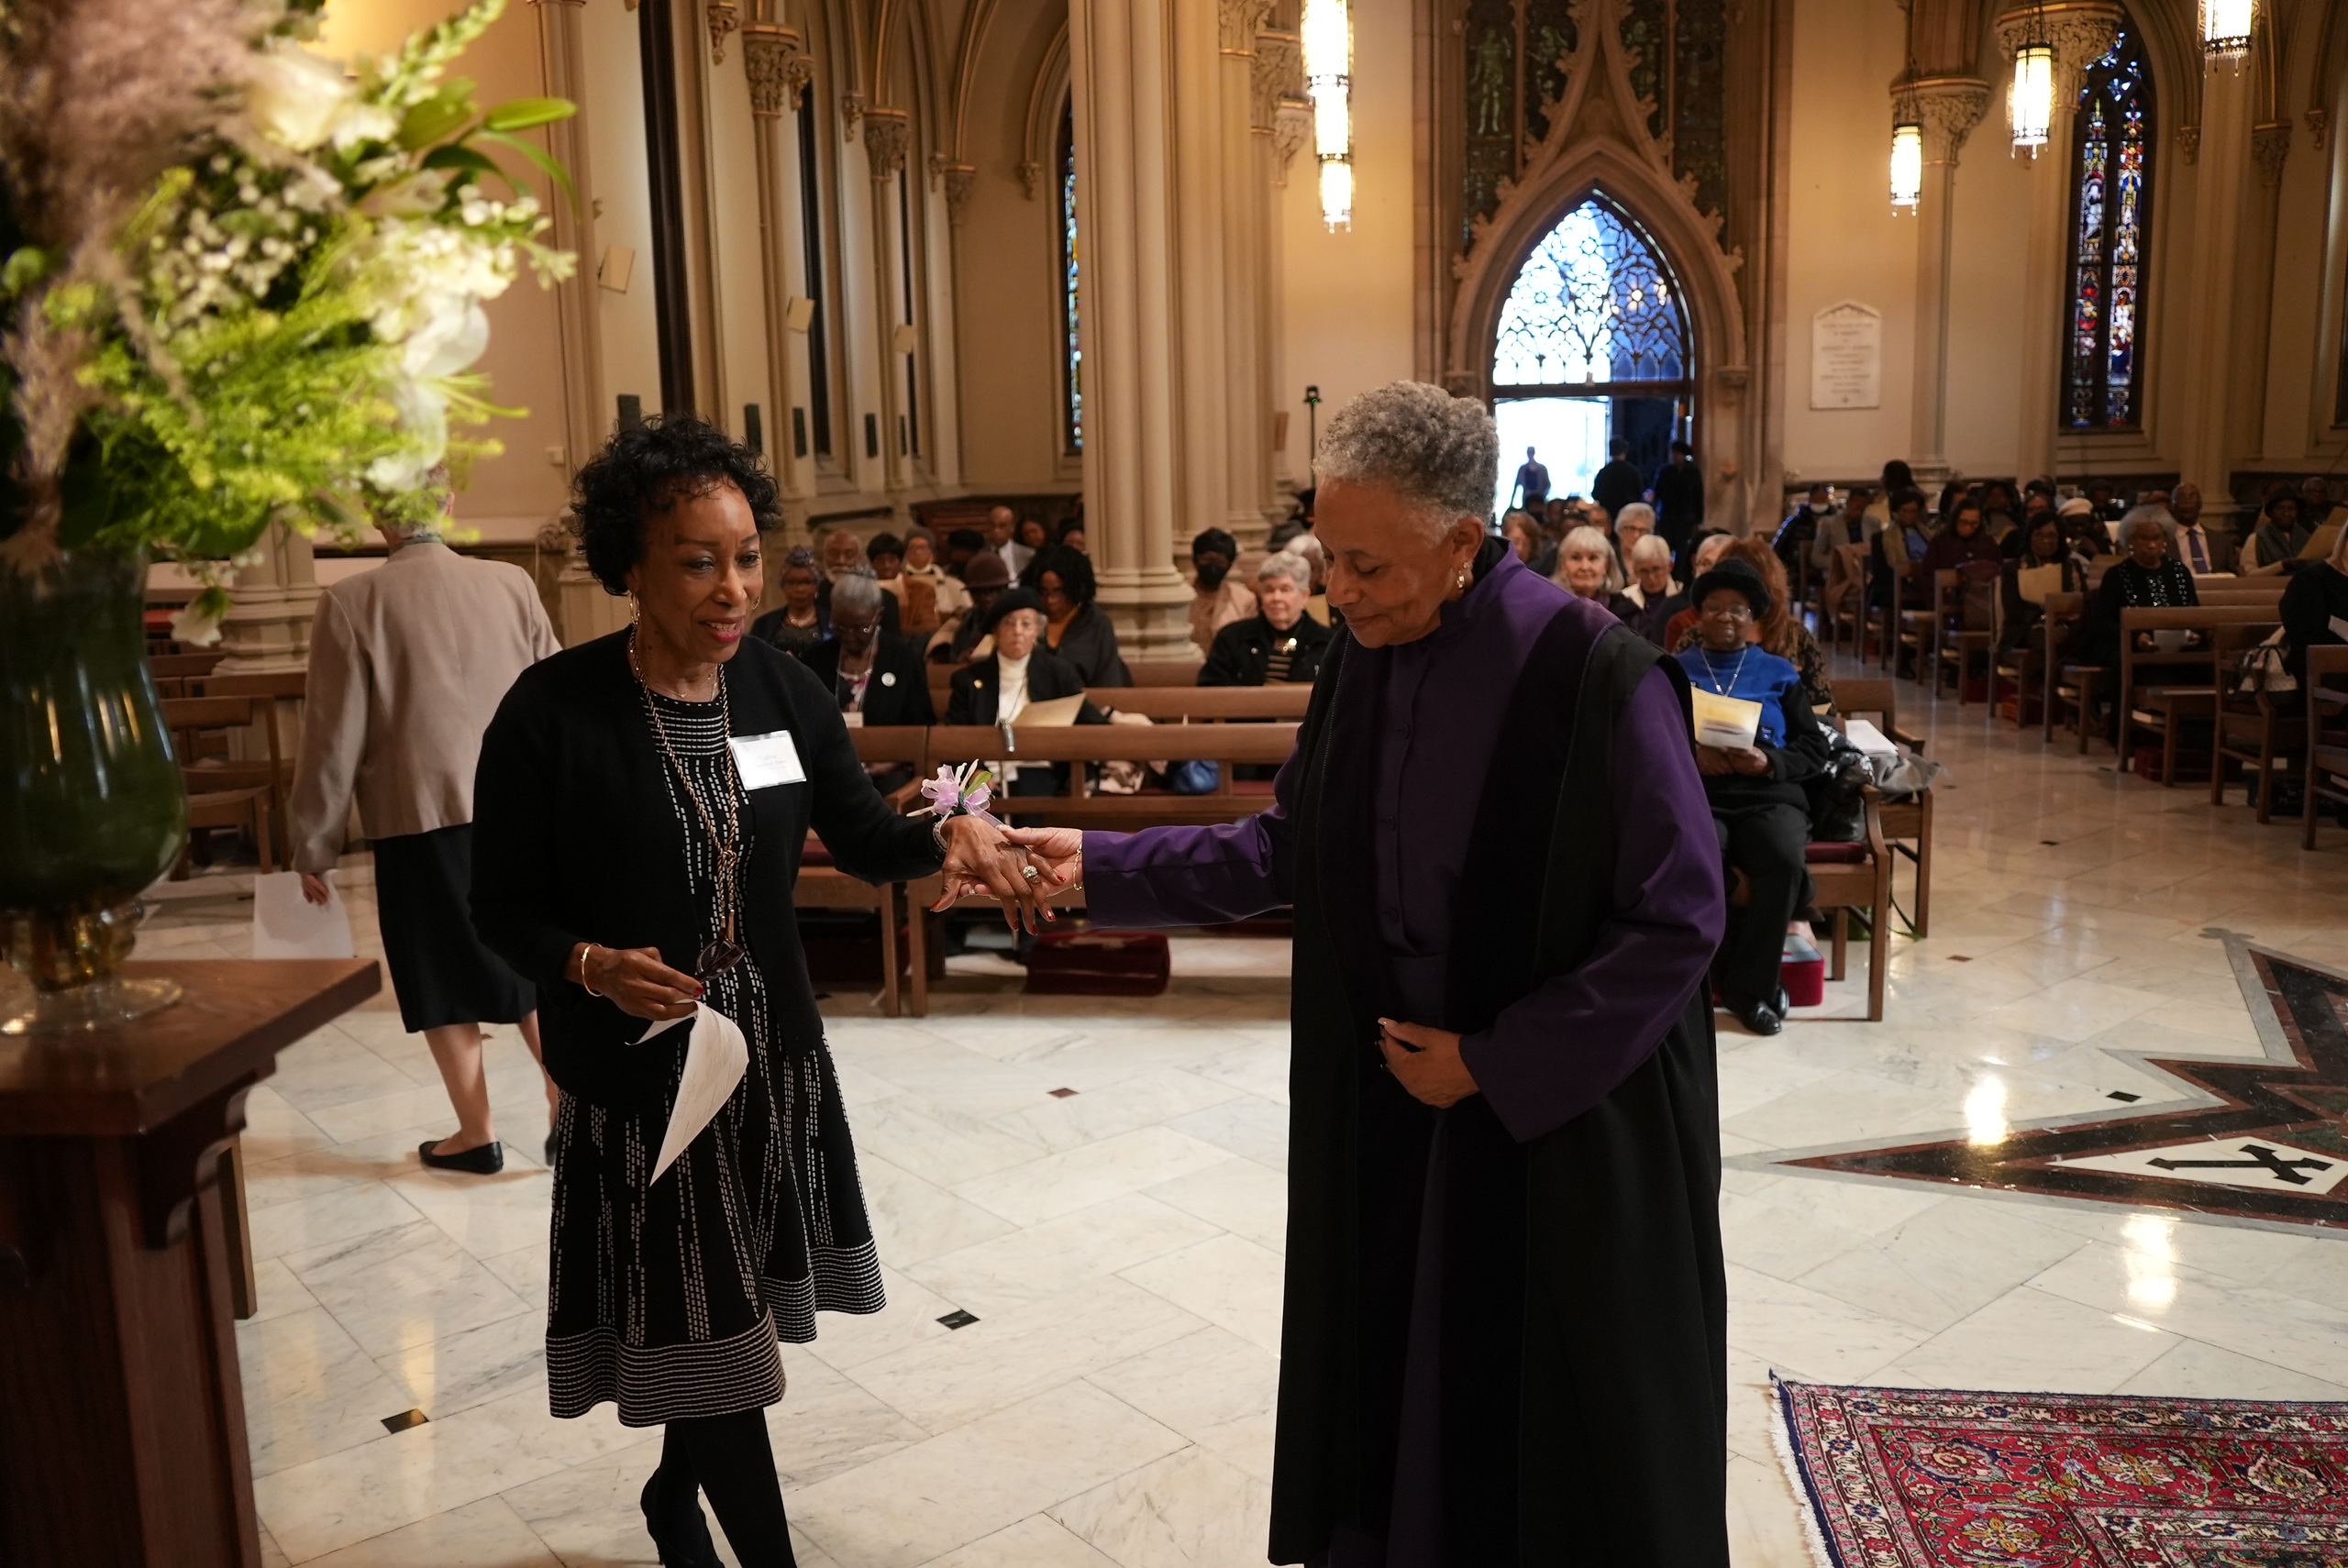 A verger leads a woman in the Cathedral